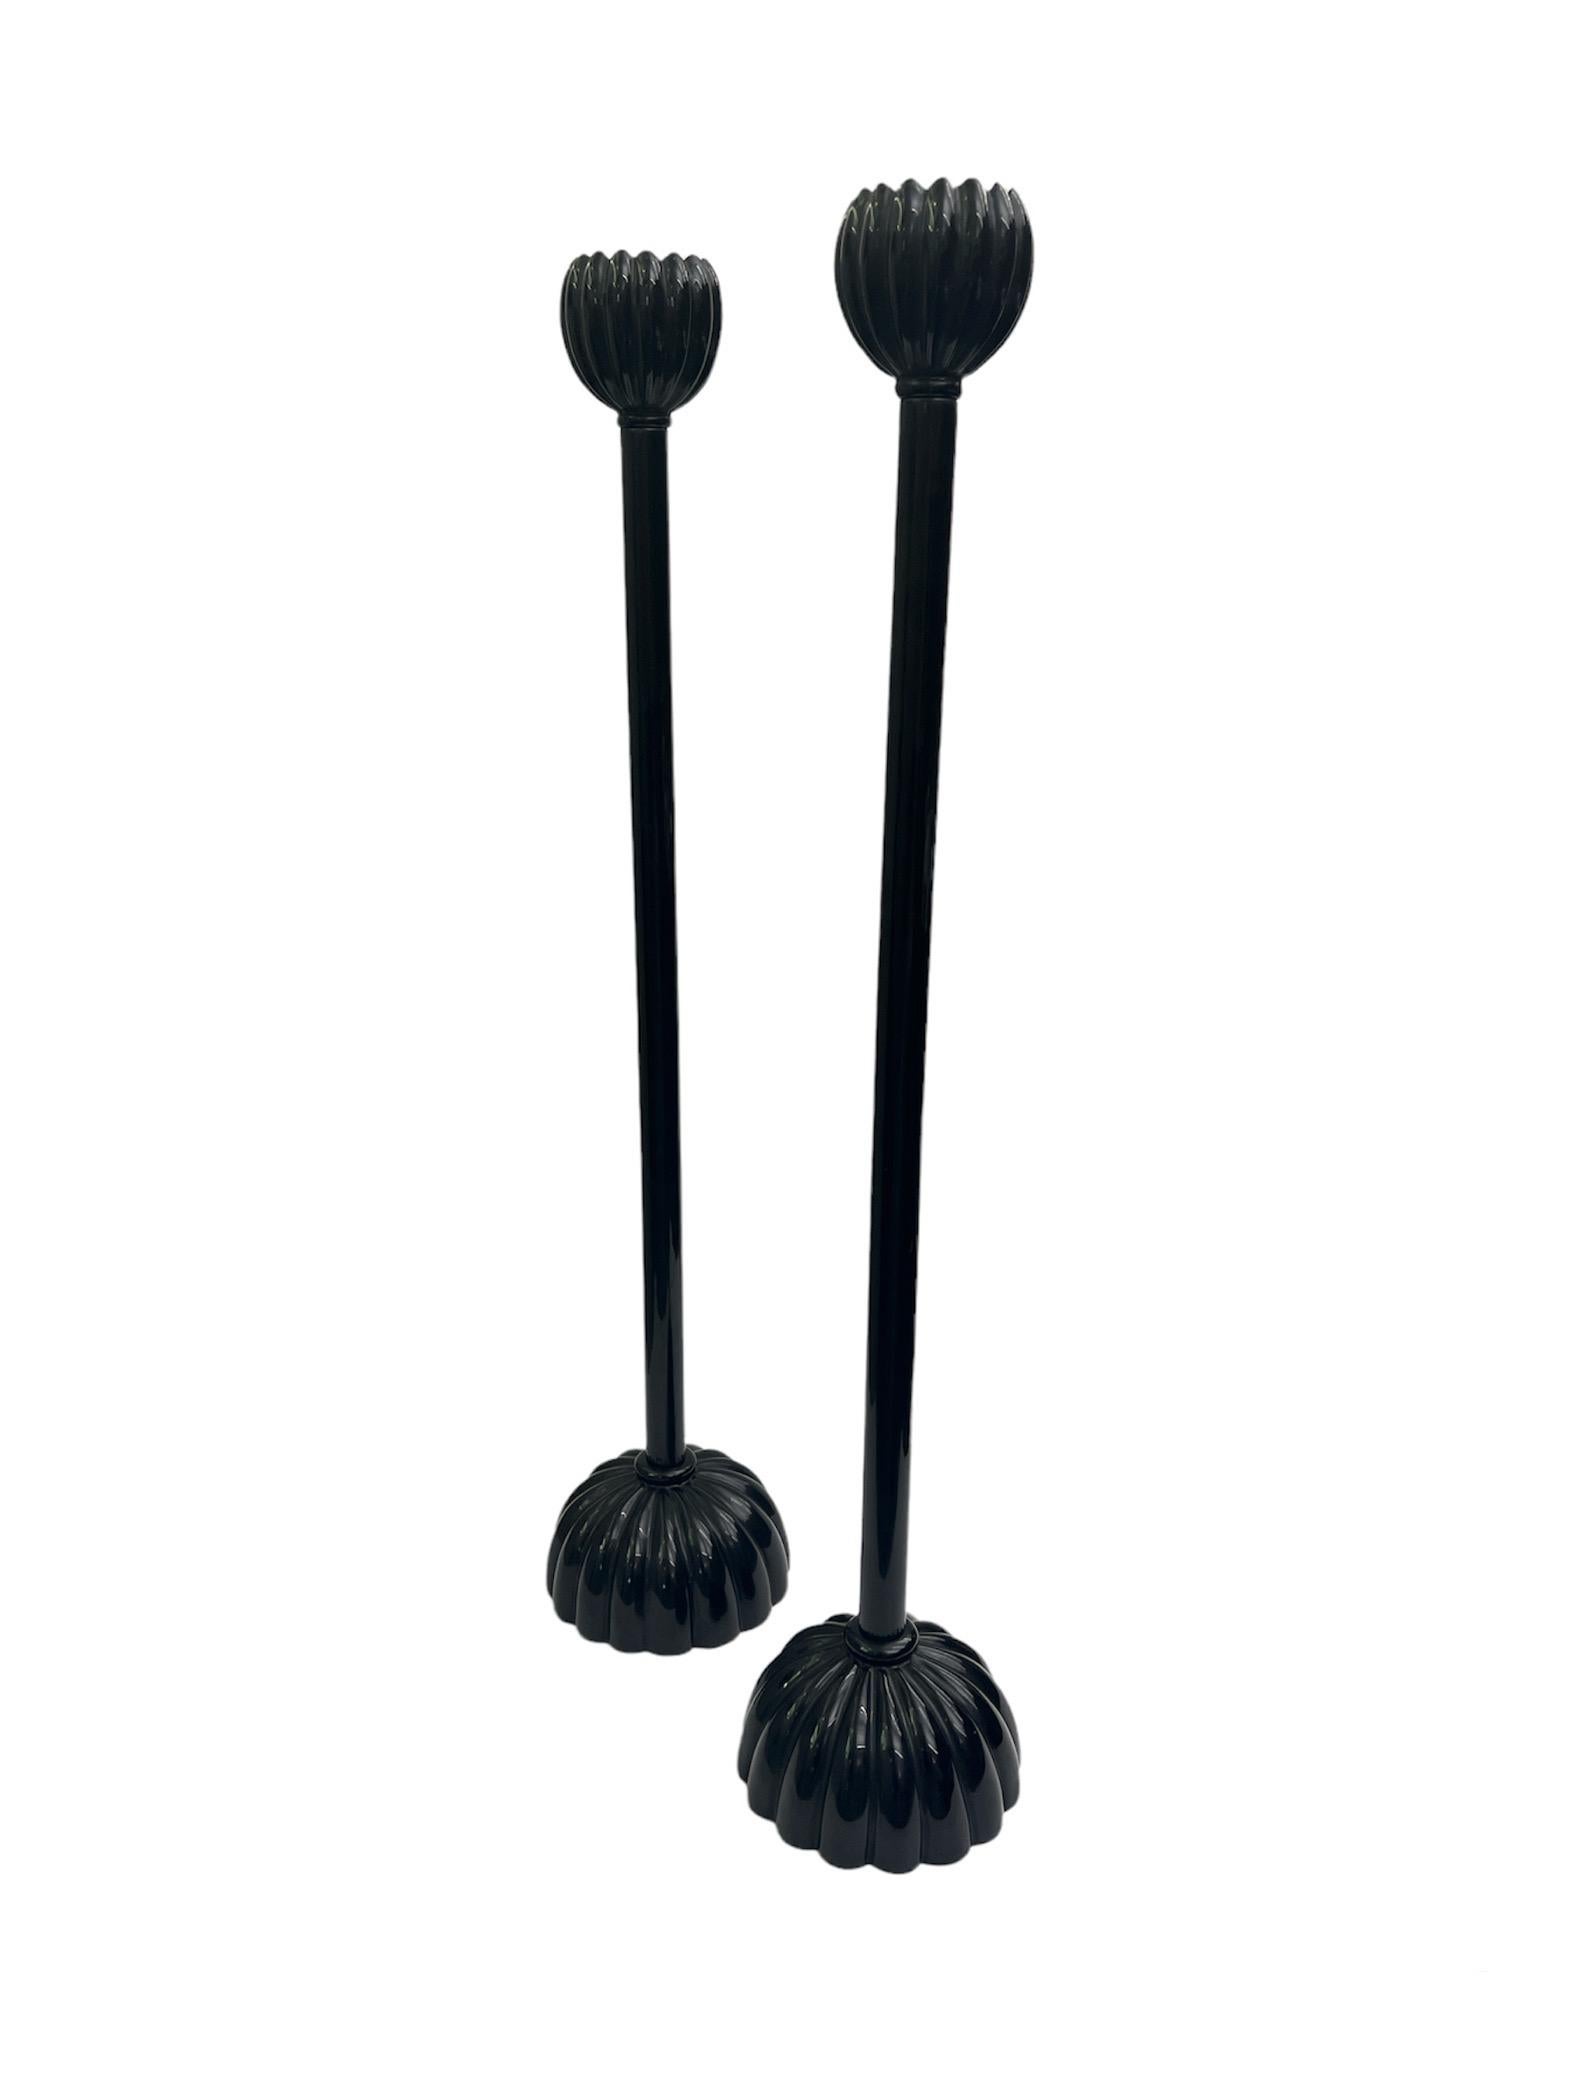 A pair of tall and elegant Japanese style black lacquered candlesticks from the late 20th Century . Out of the reeded base forms a long stem with a tulip form top to place candles.

Property from esteemed interior designer Juan Montoya. Juan Montoya